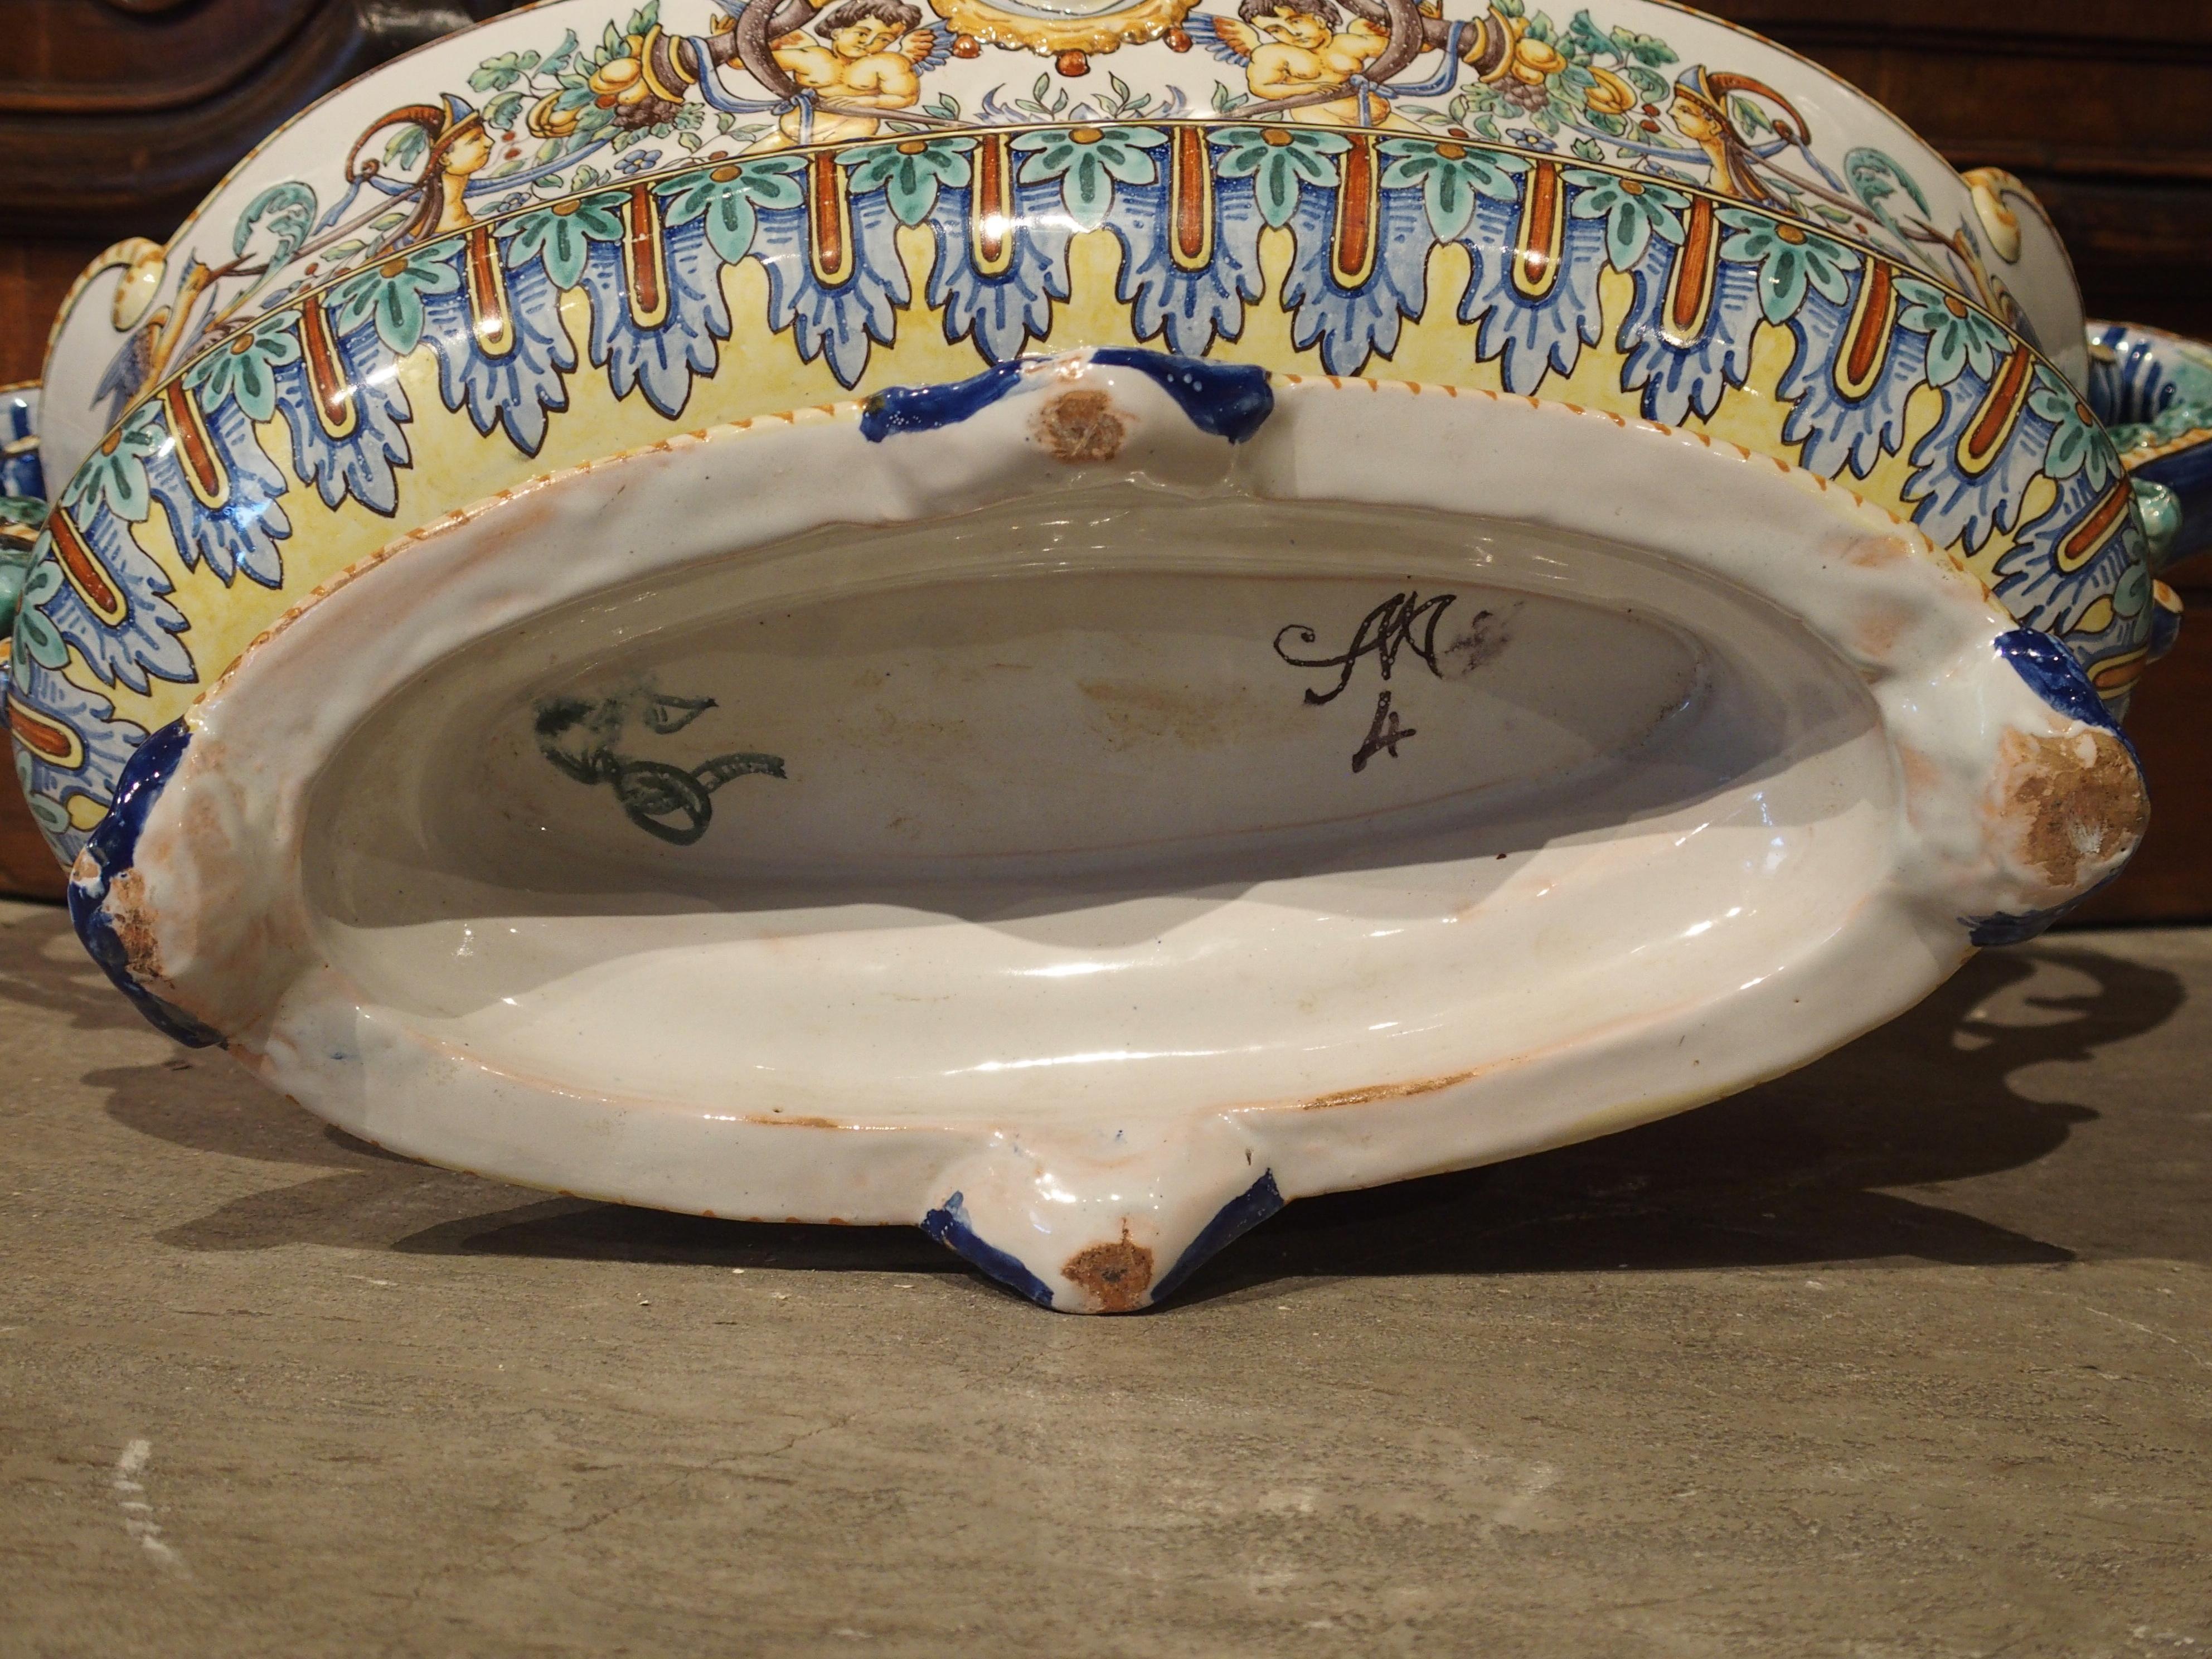 This colorful French faience jardinière, is signed by Antoine Montagnon, of Nevers, France (bottom.) The town of Nevers is a well known faience production center in France. They have been producing high quality pieces since the beginning of the 17th